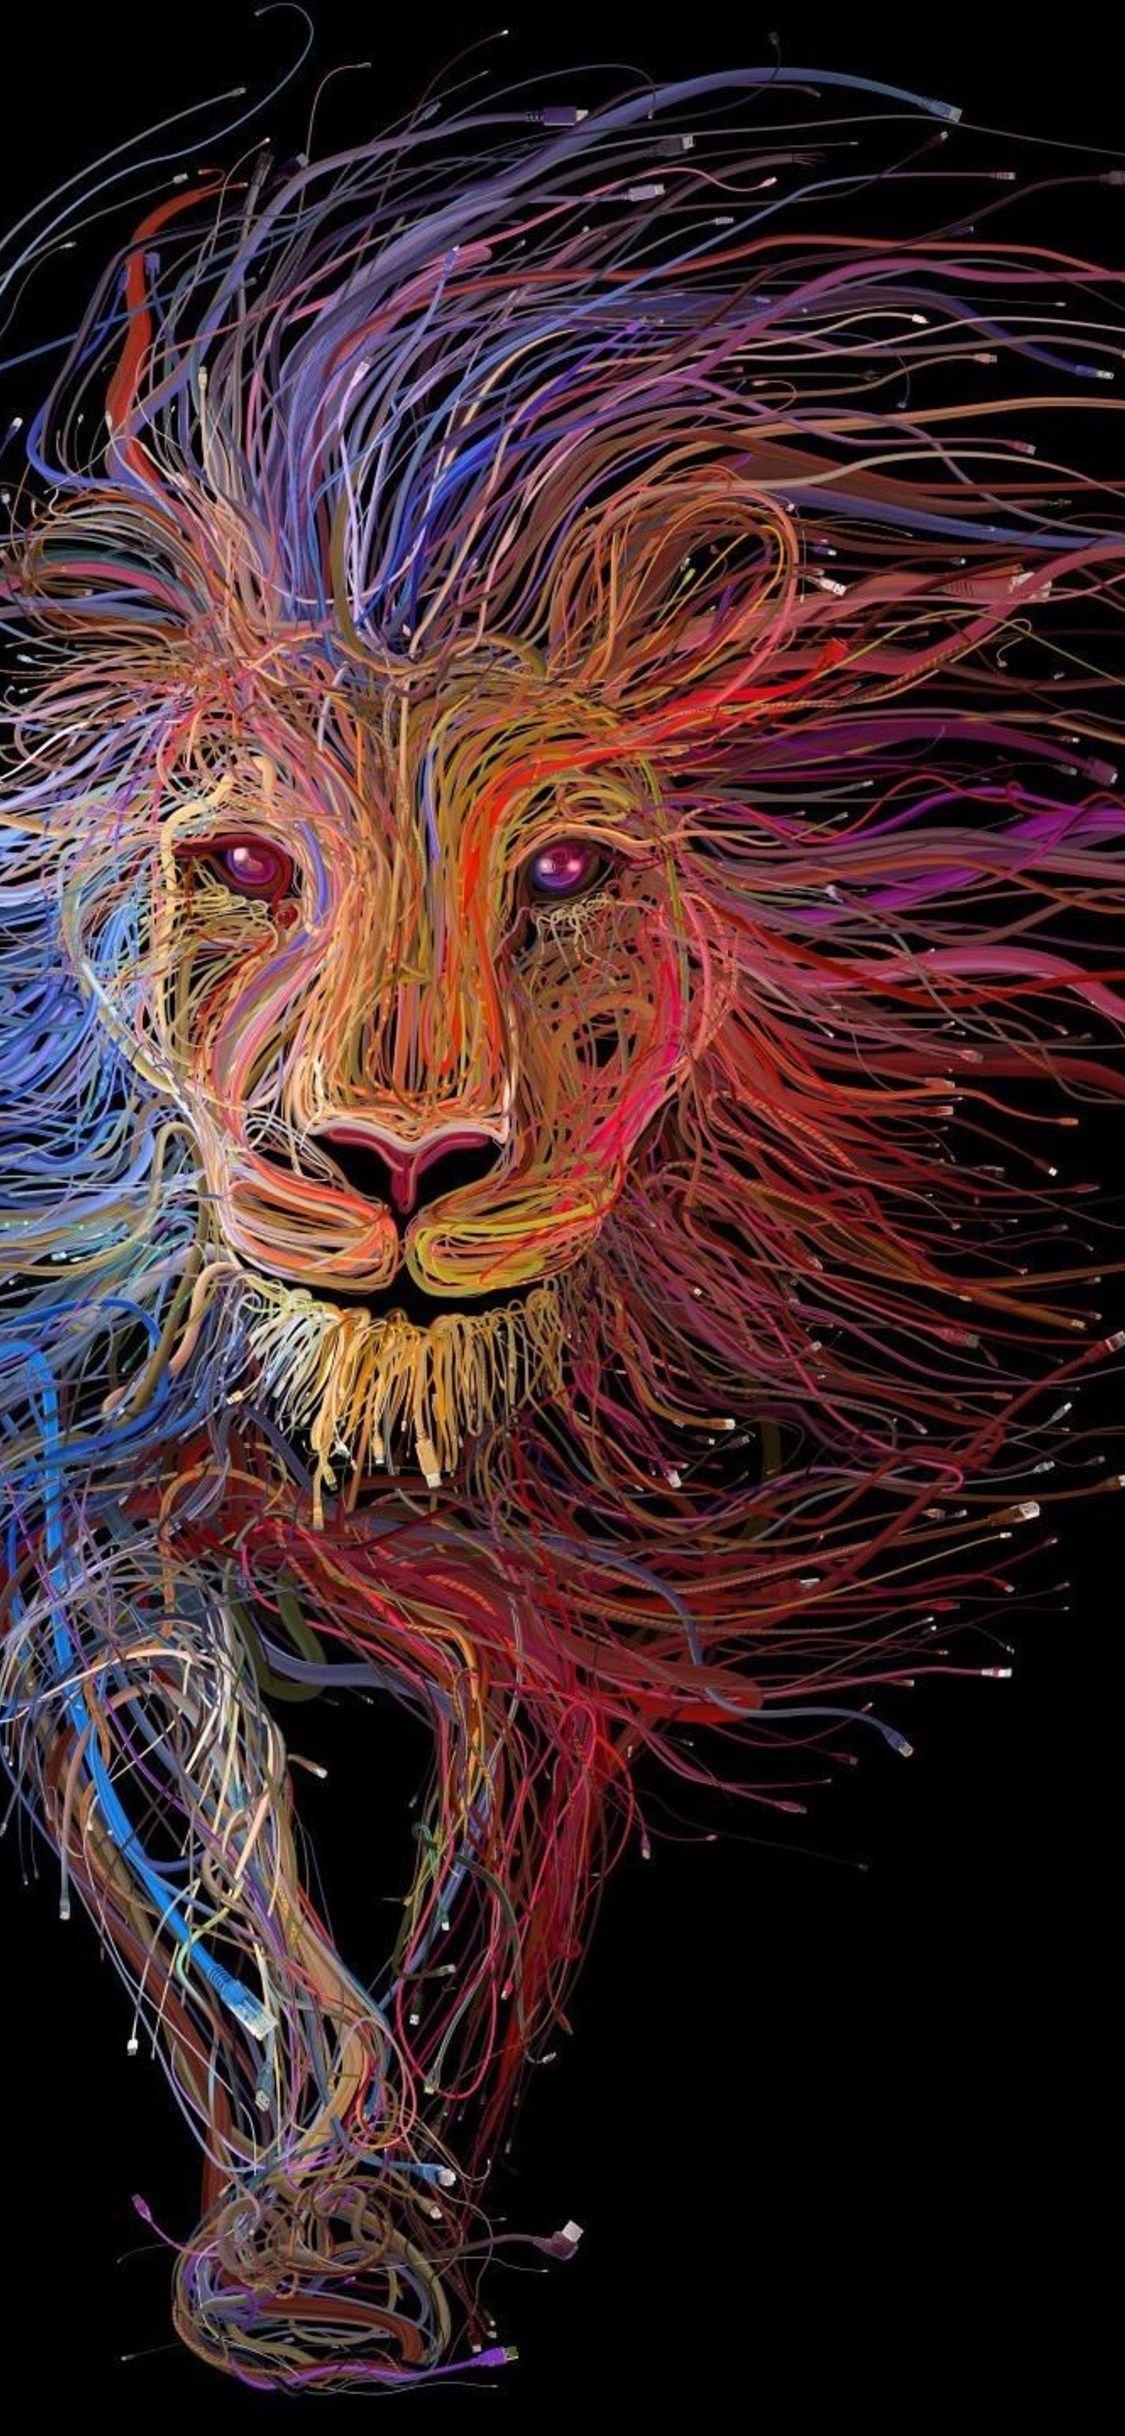 Lion Wires Art In 1125x2436 Resolution. Abstract lion, Lion wallpaper iphone, Lion wallpaper